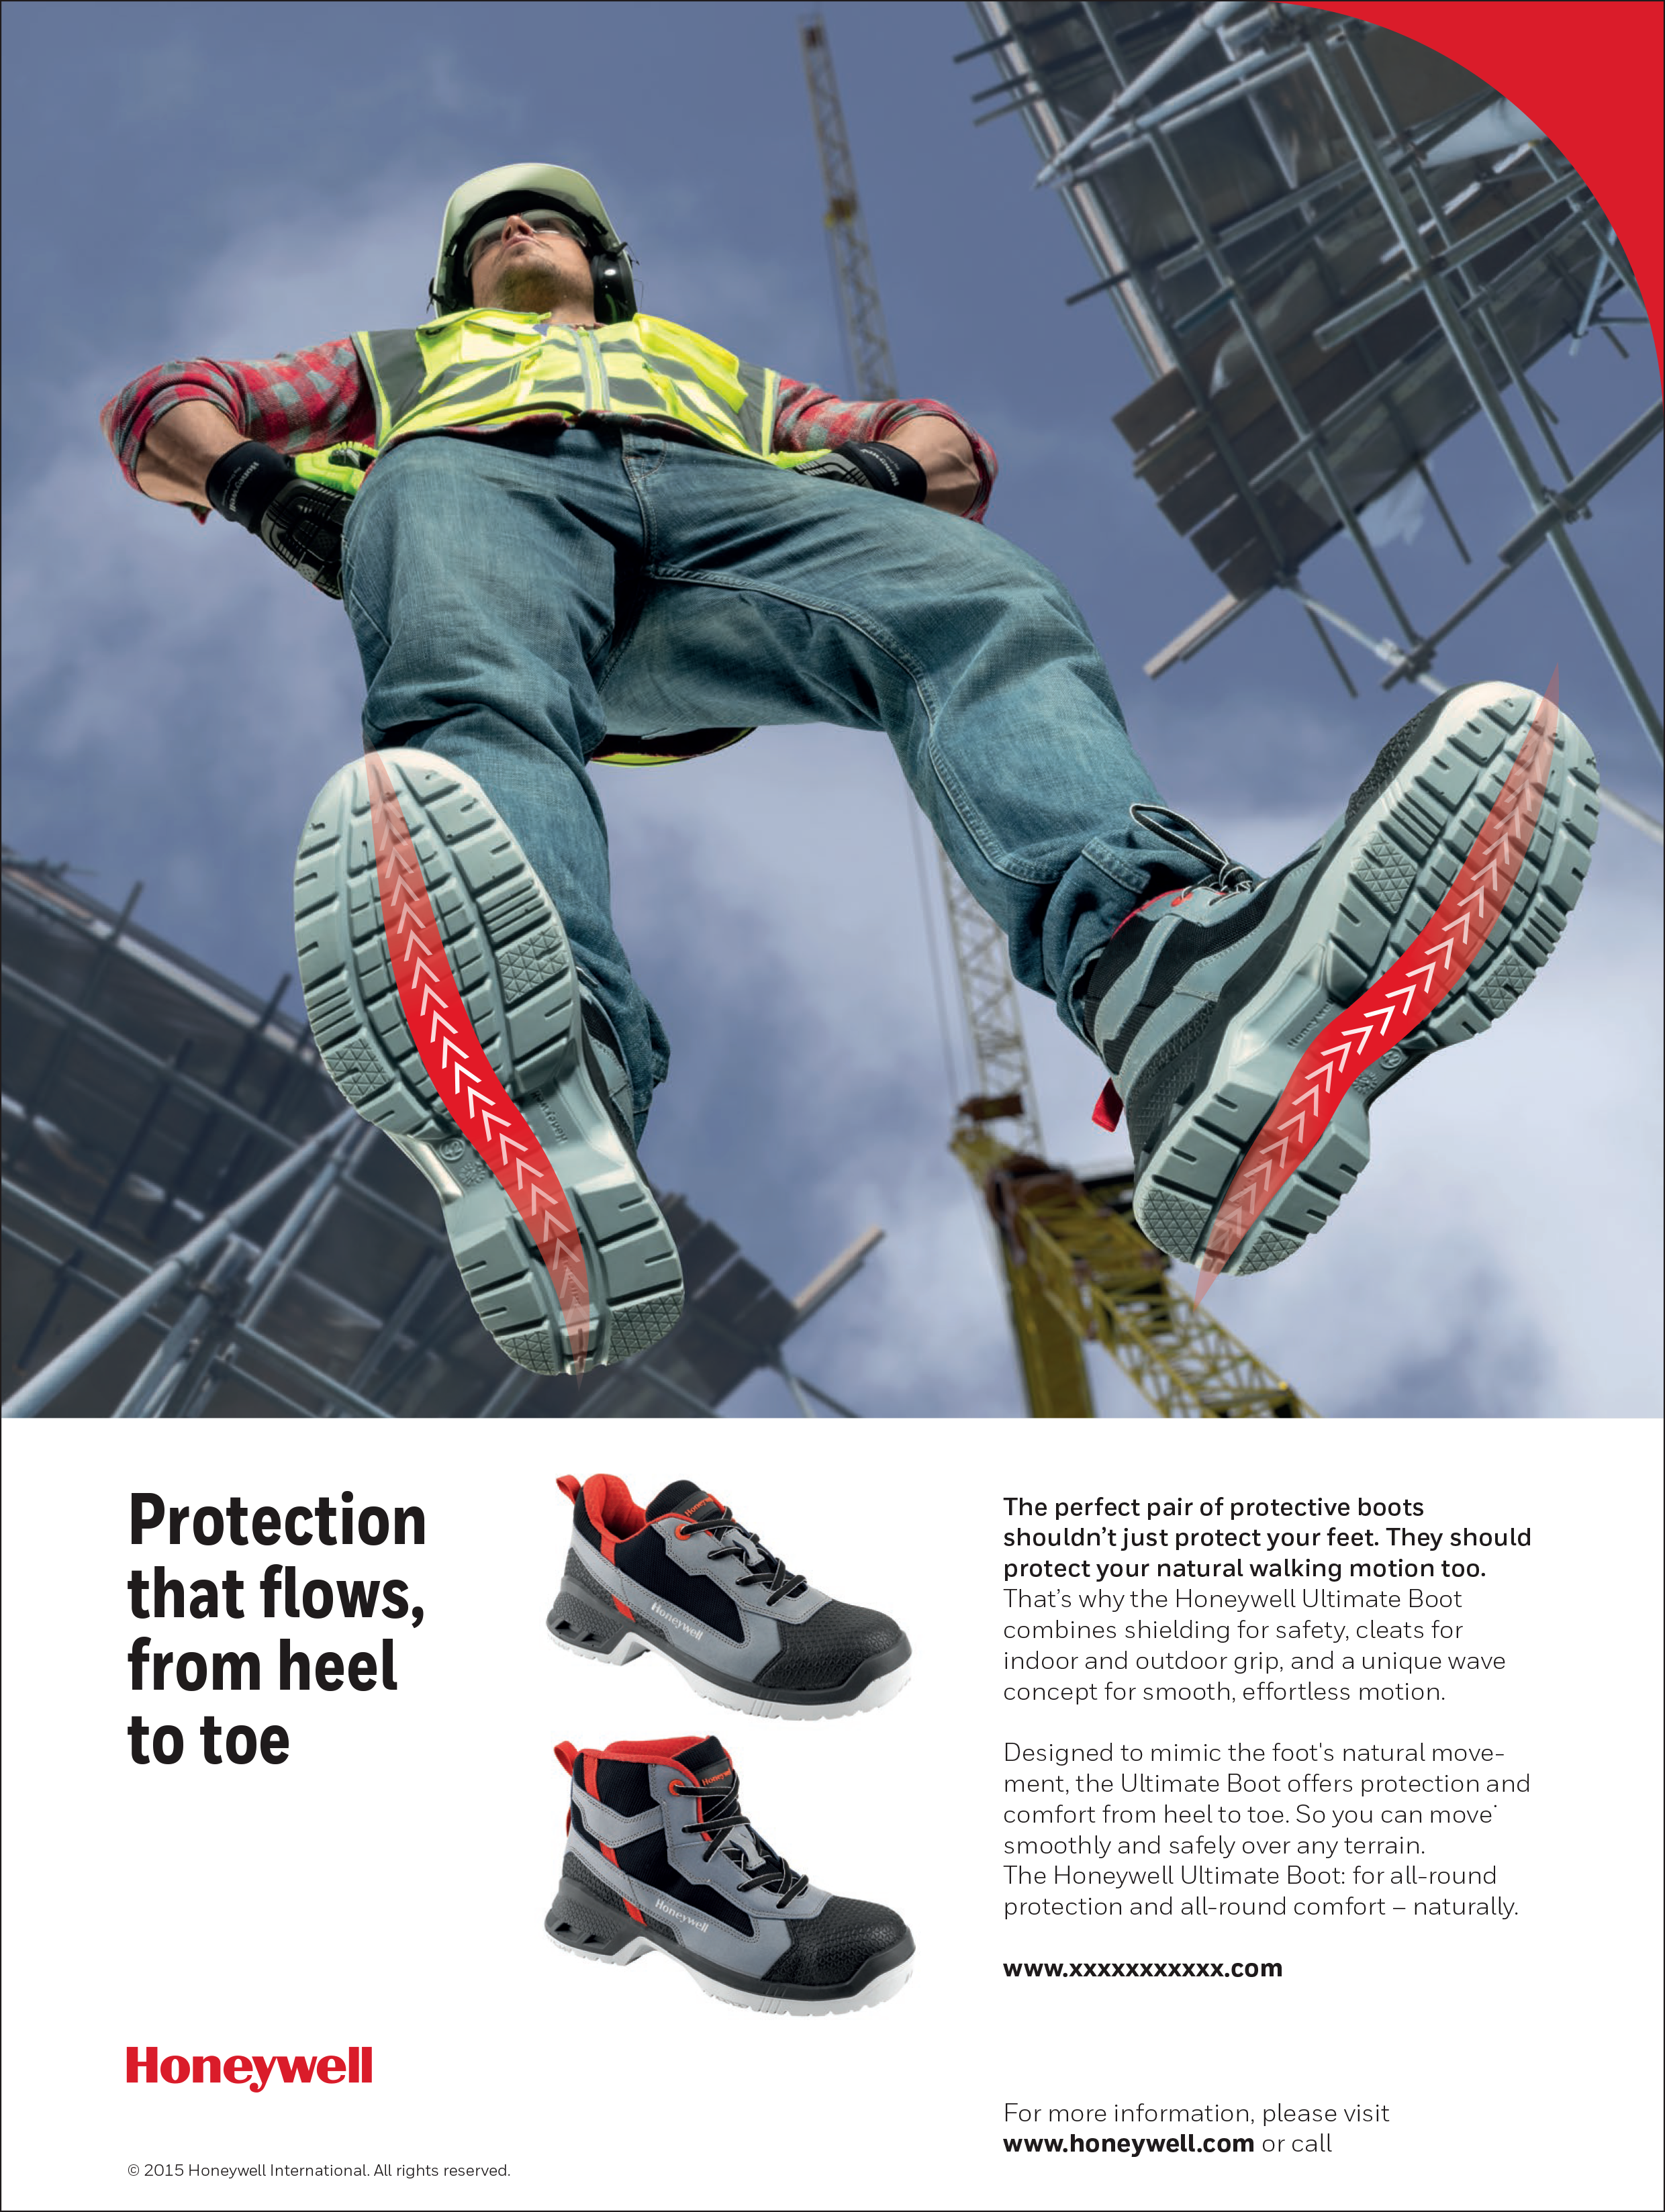 HONEYWELL Product: Protective Boots